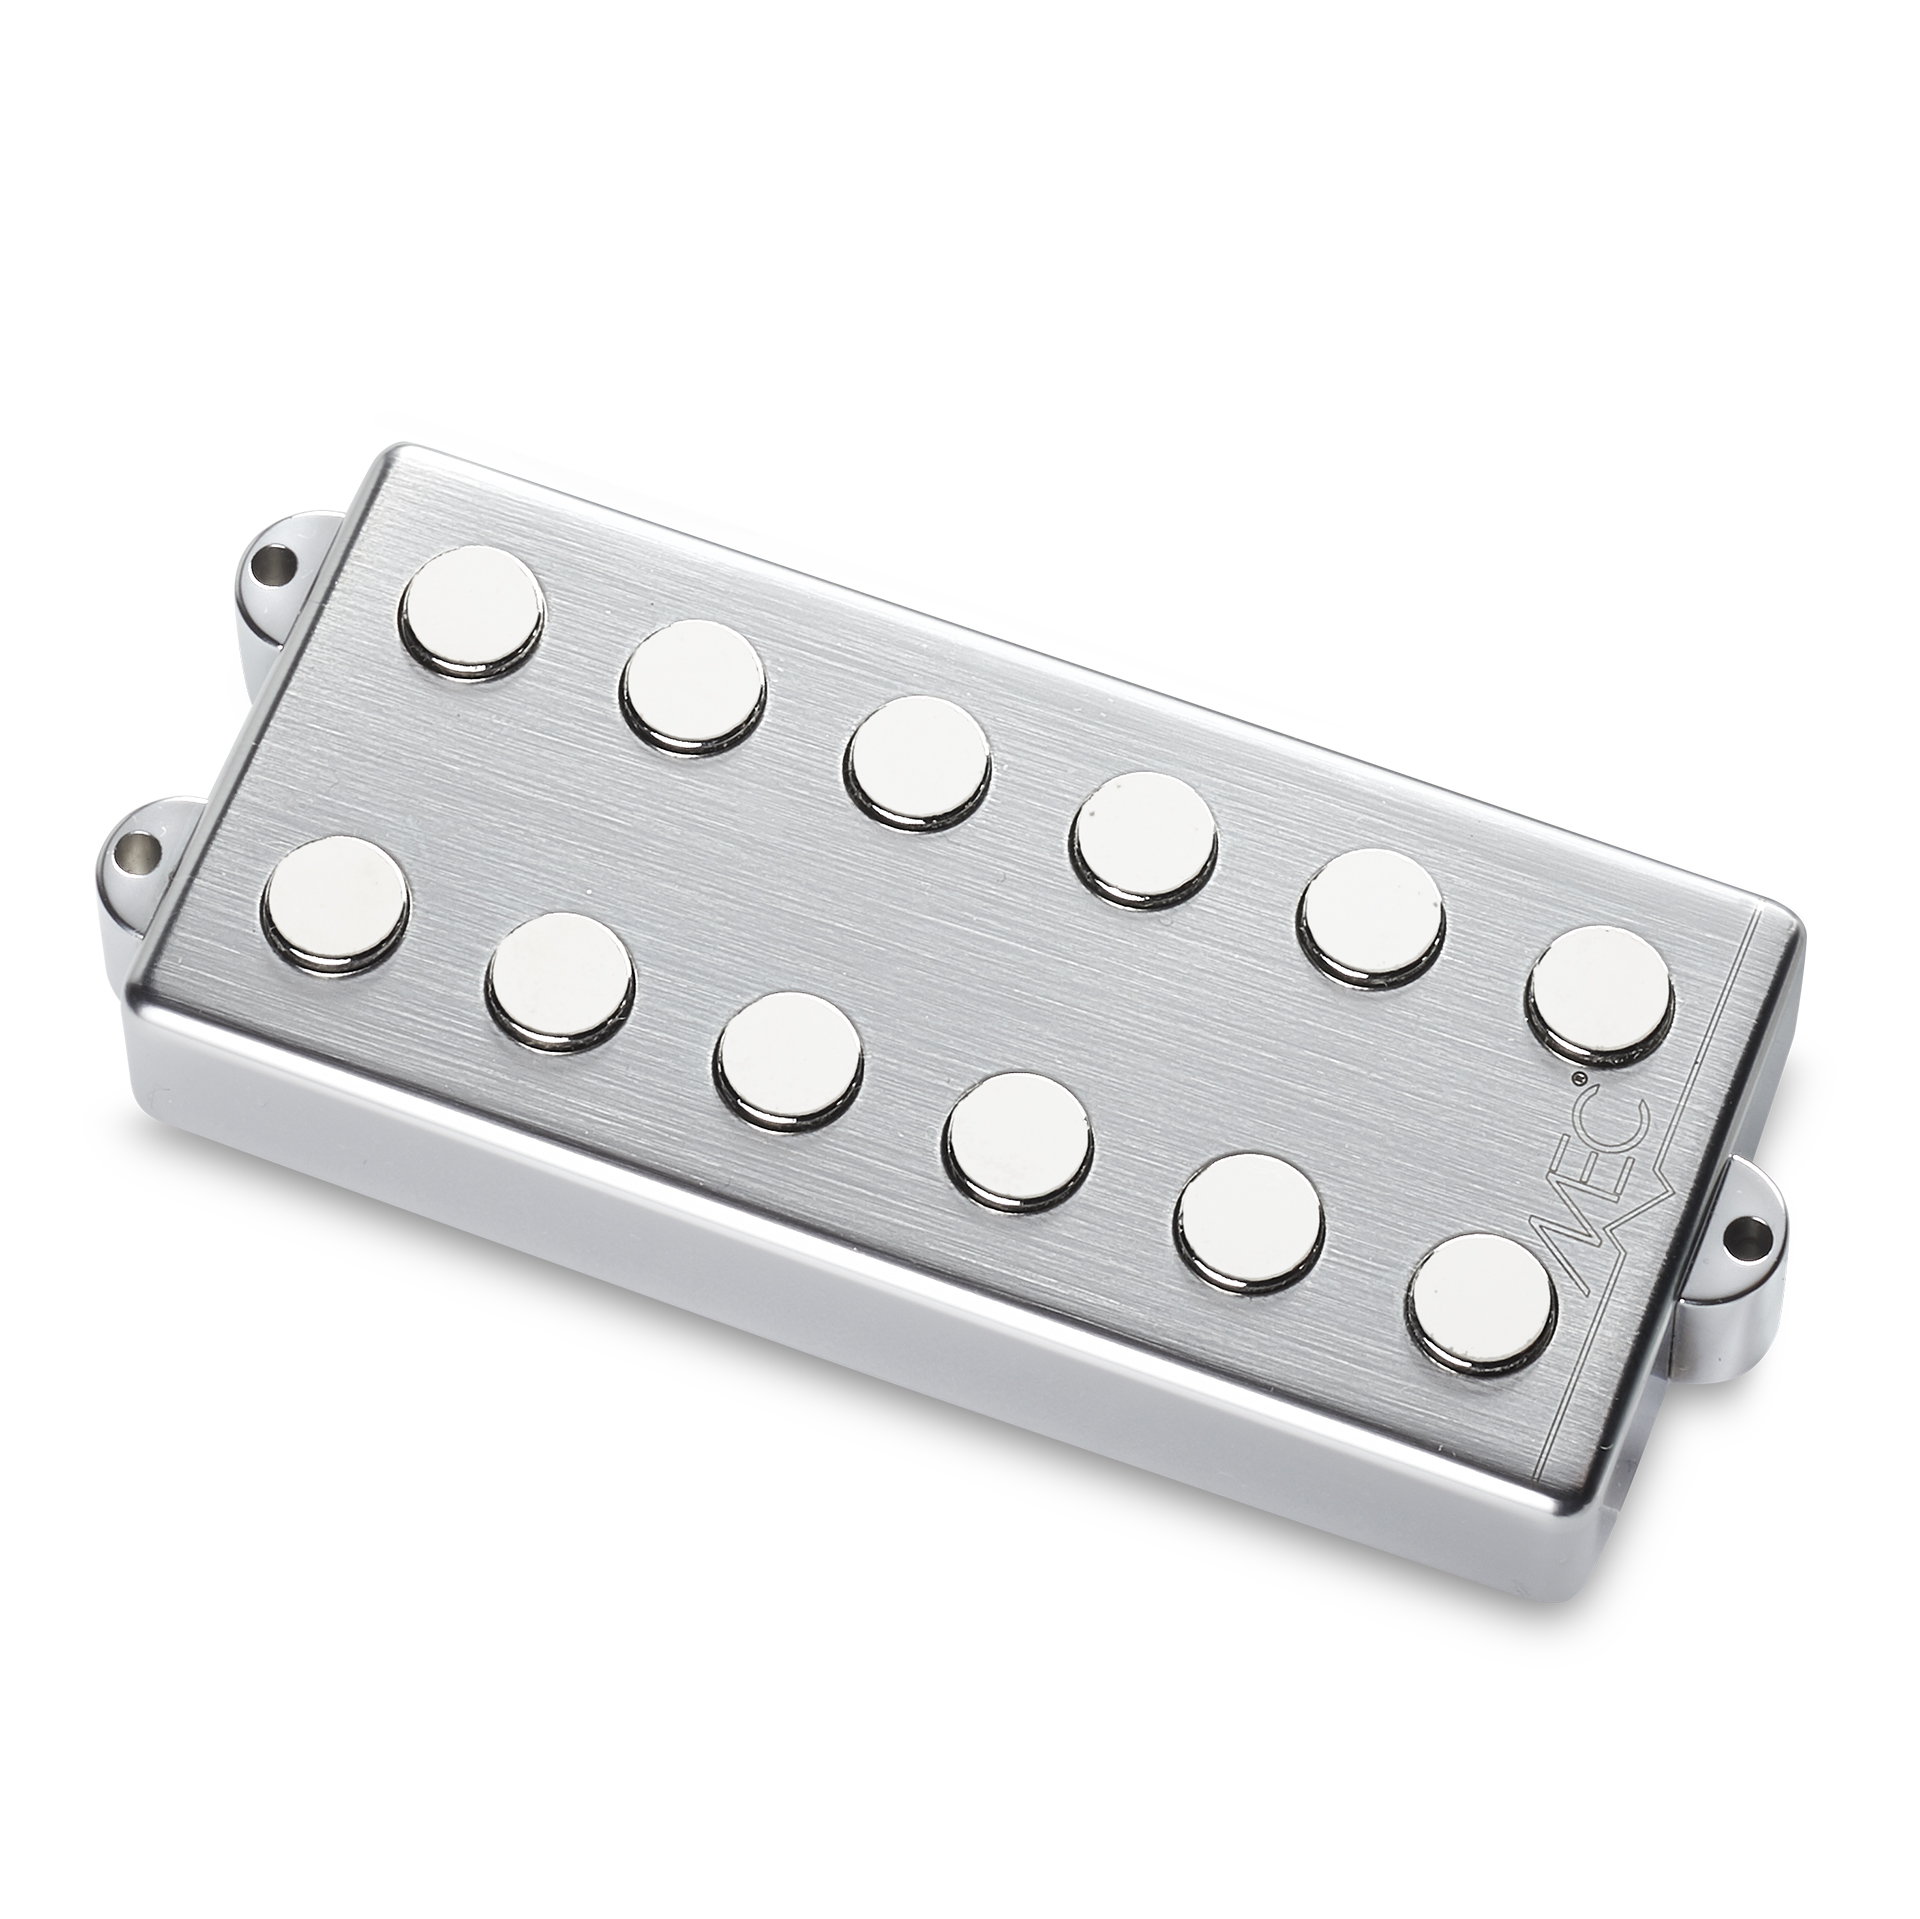 MEC Passive MM-Style Bass Pickup, Metal Cover, 6-String, Neck - Brushed Chrome